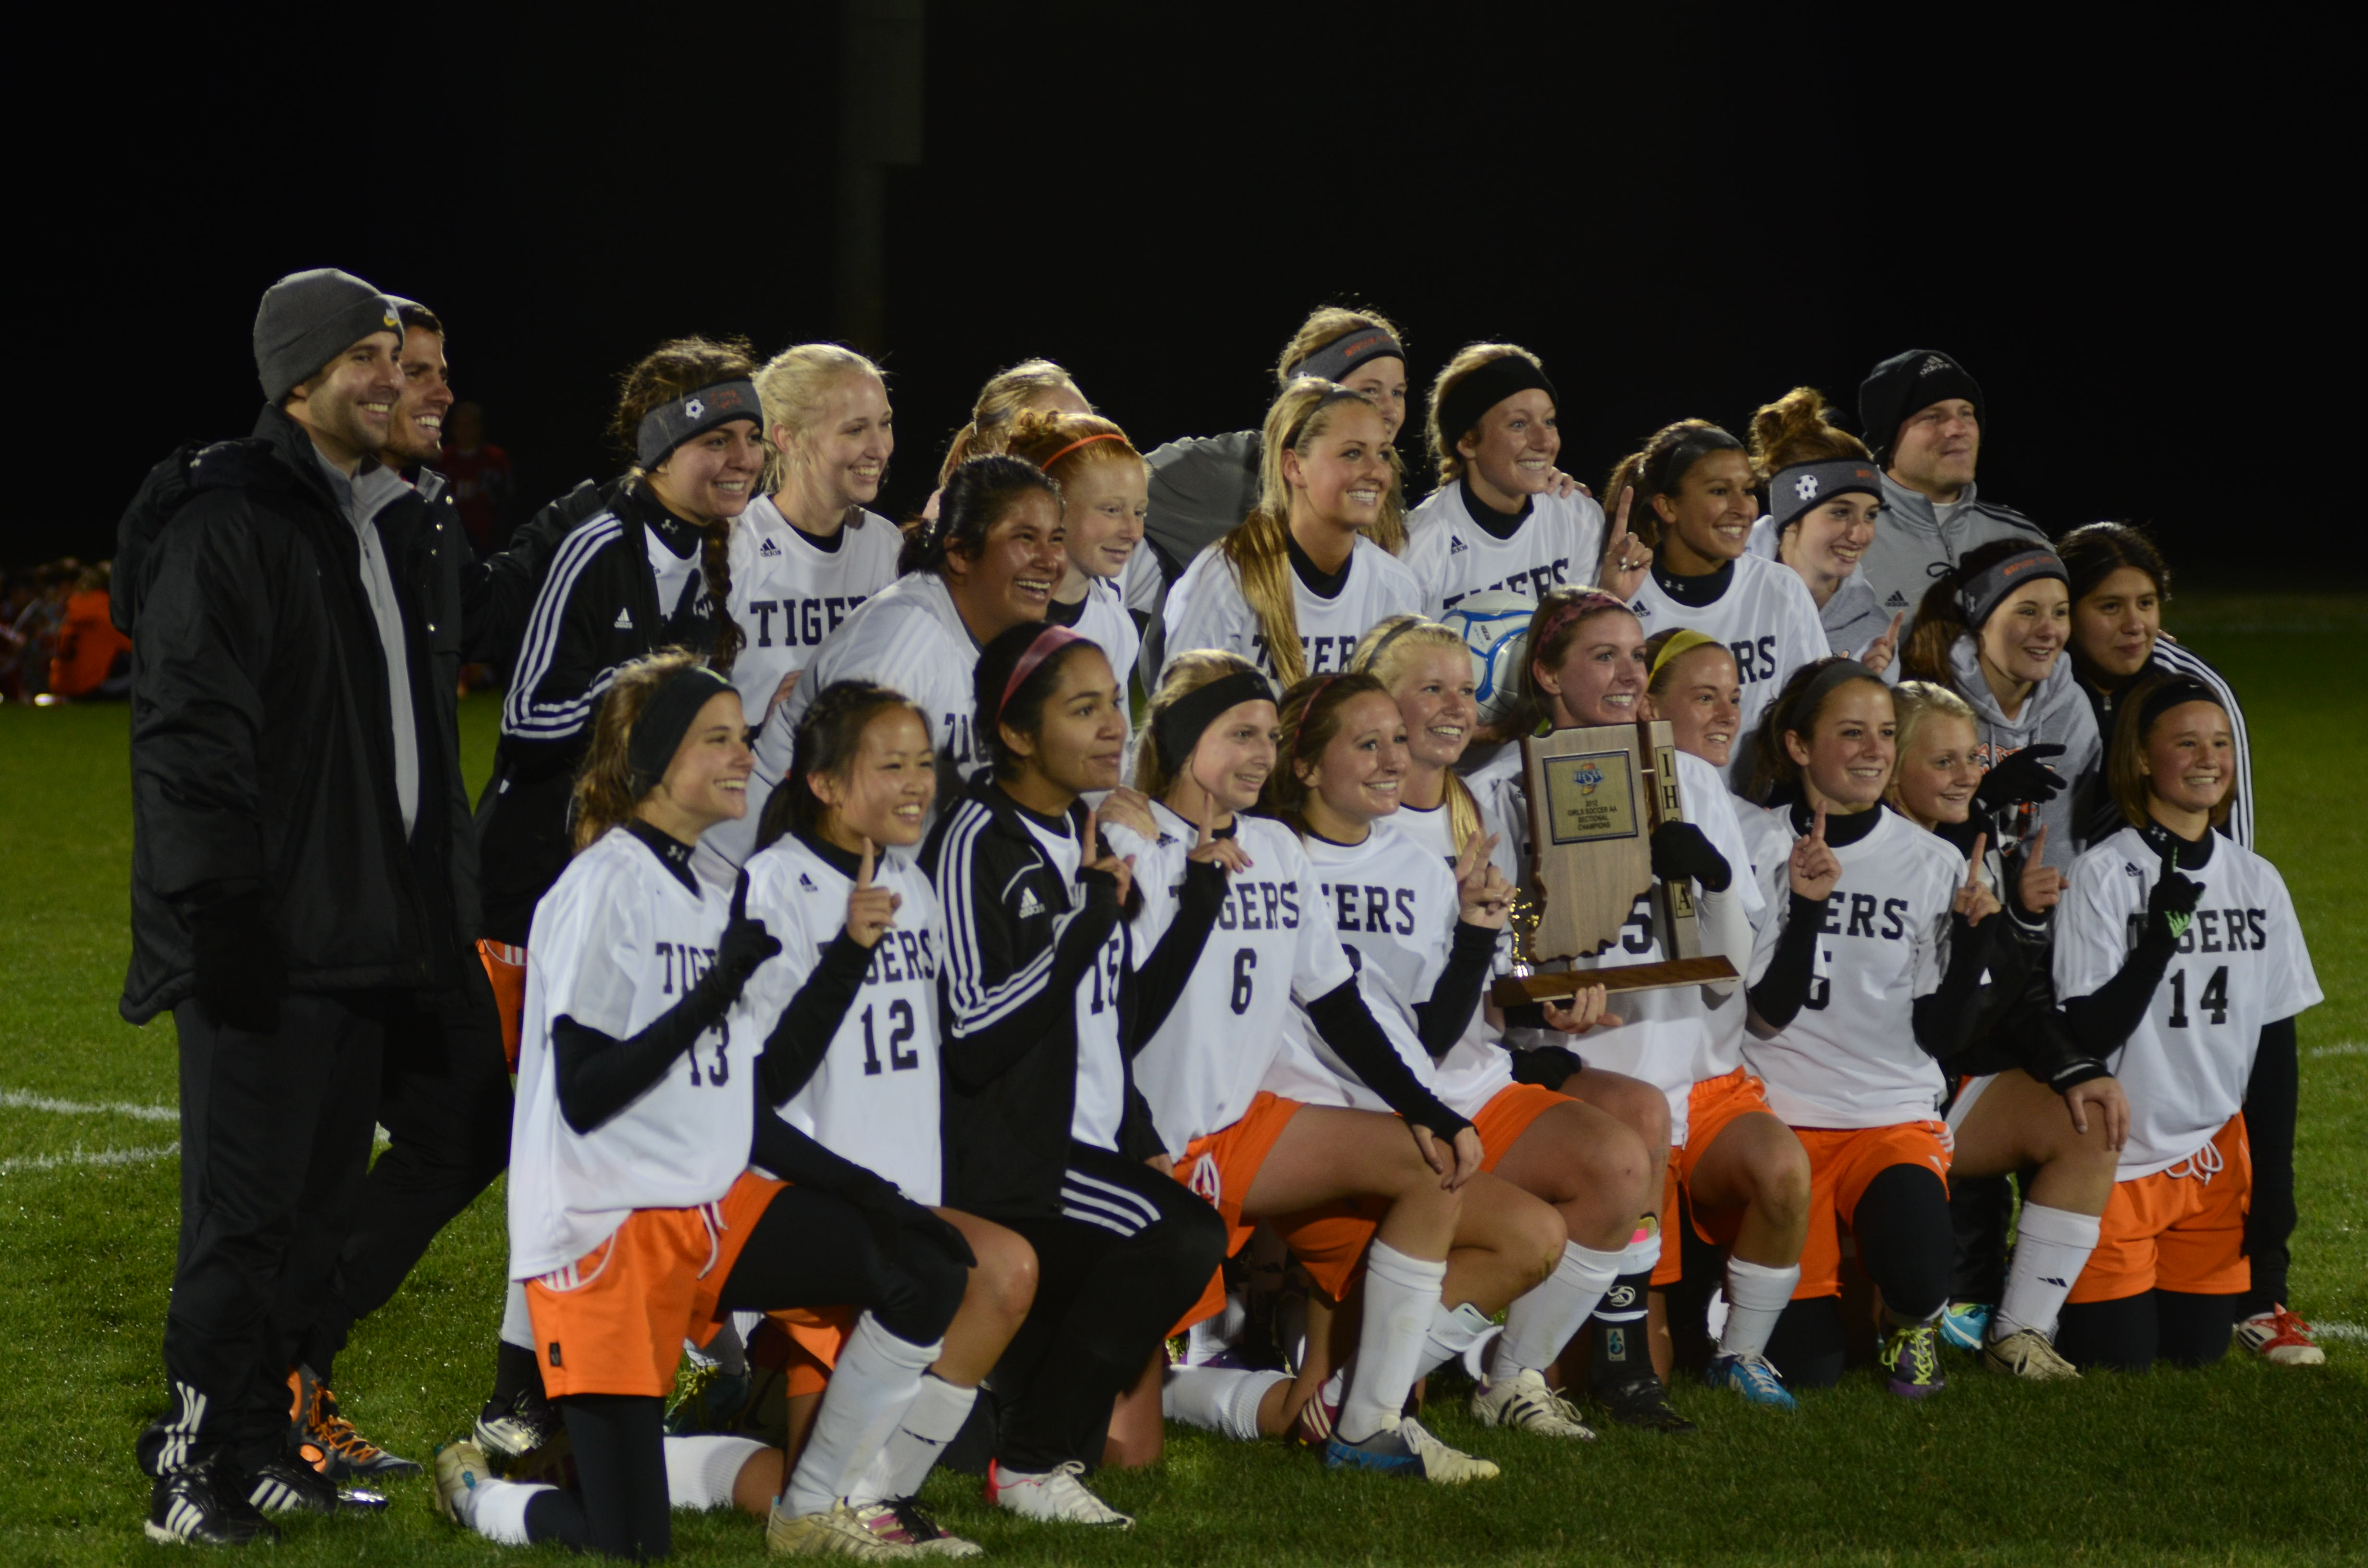 Tigers Claim Third Straight Sectional